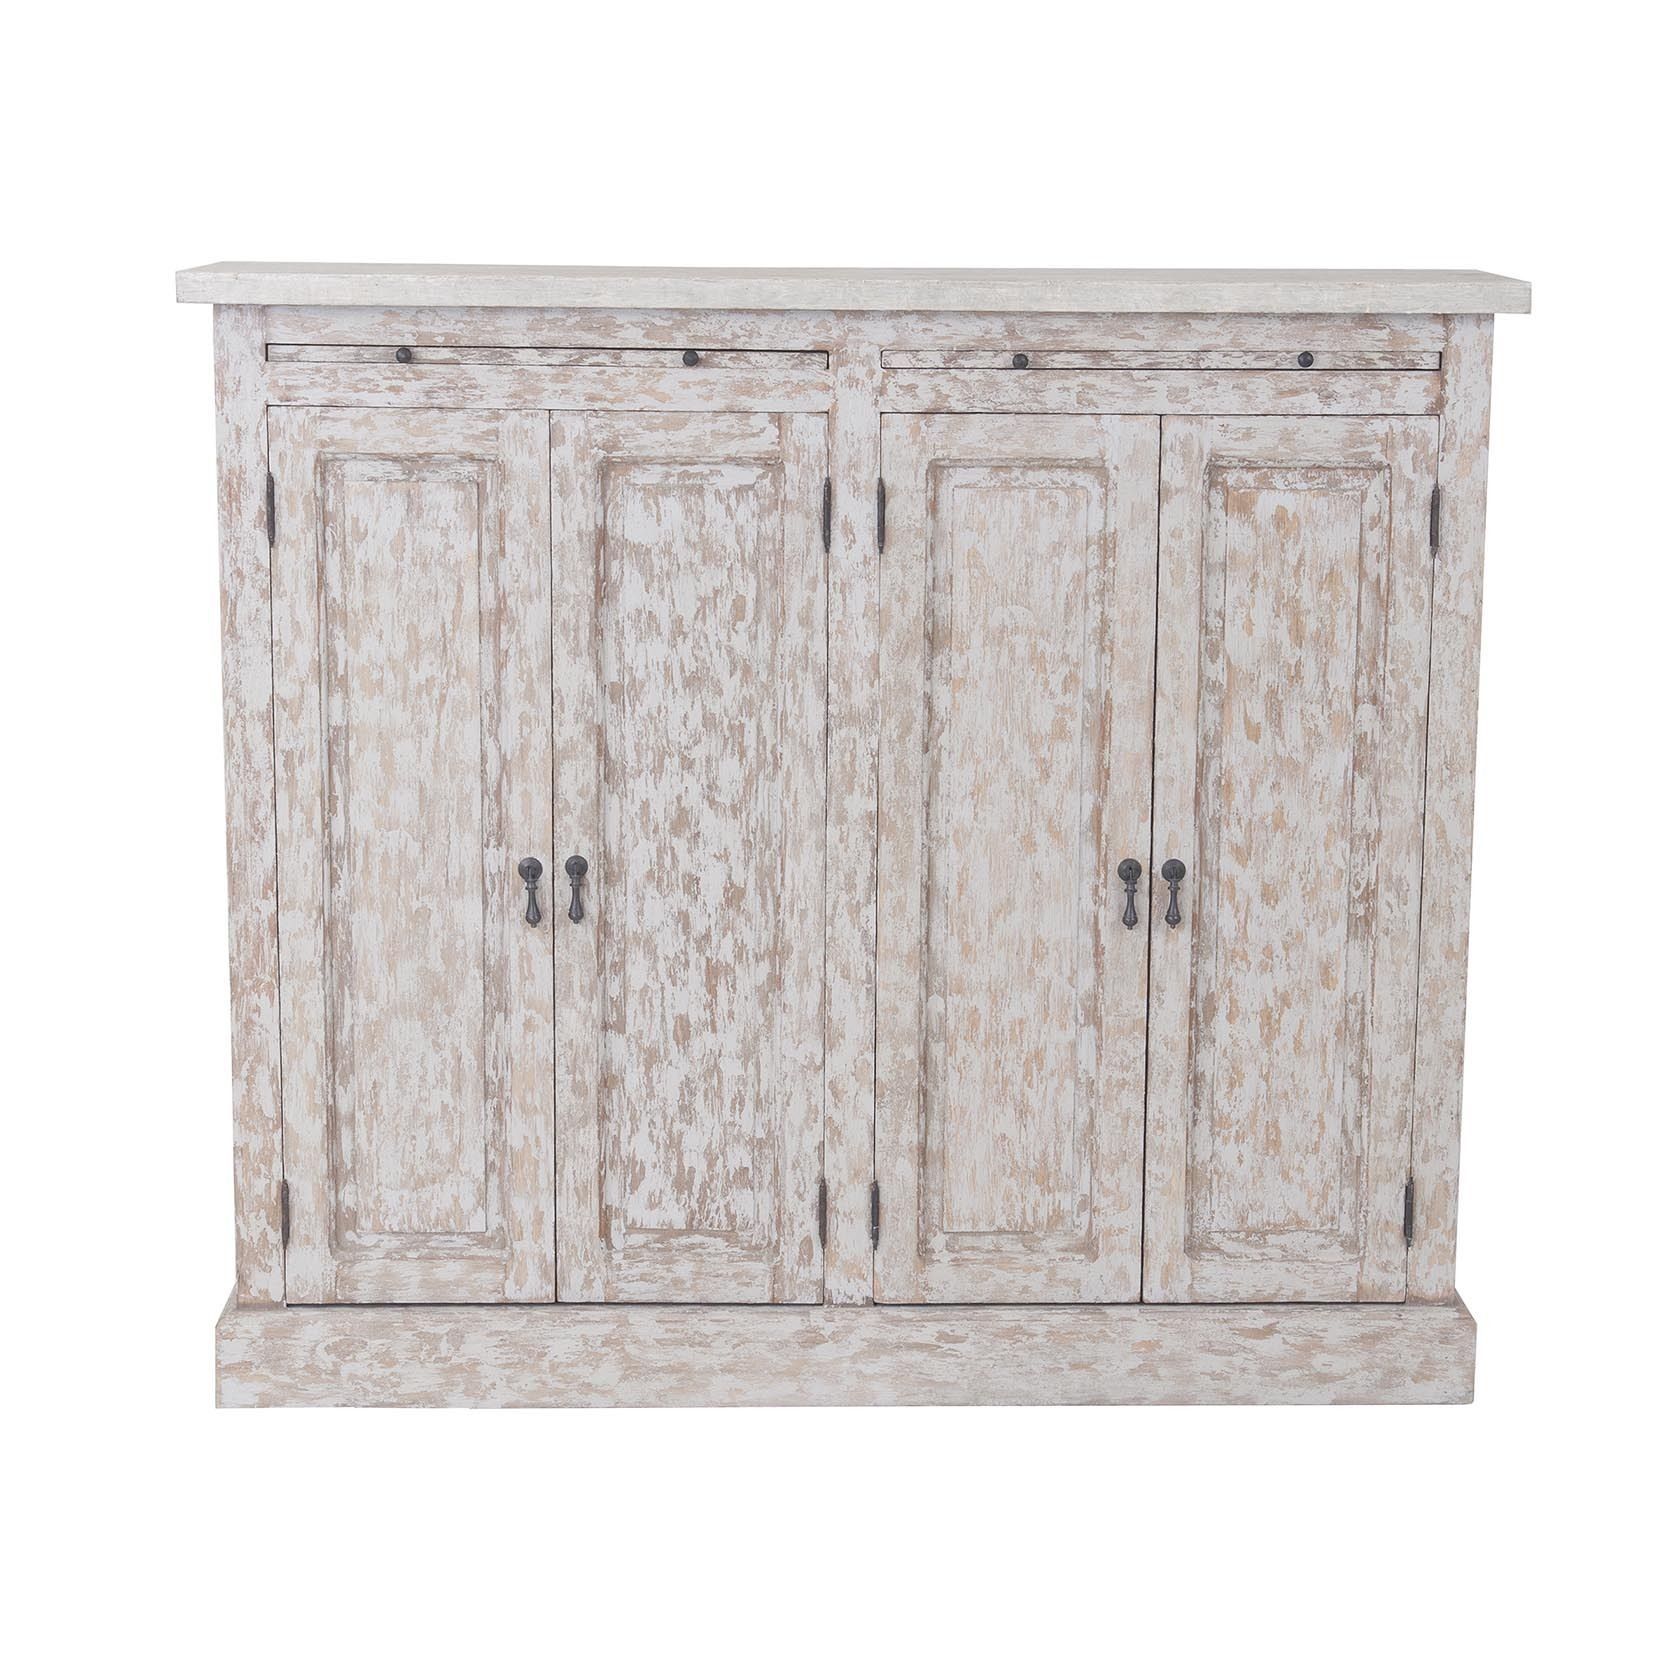 Flagler Rustic Antique Grey Sideboard | Sideboards Regarding Most Up To Date Drummond 4 Drawer Sideboards (View 13 of 20)